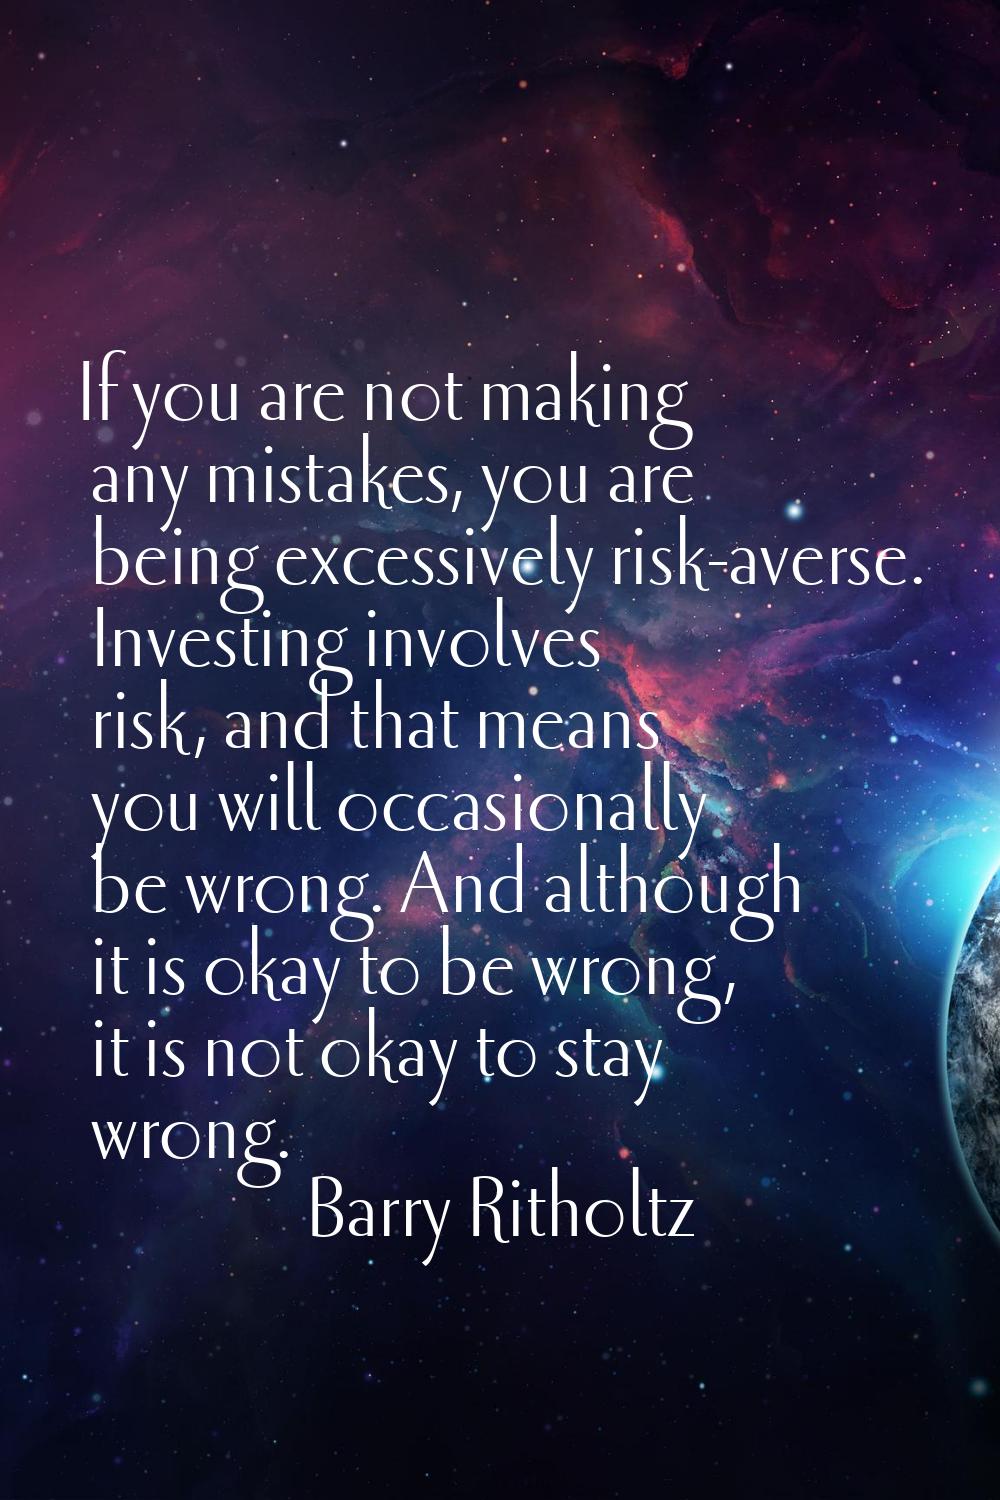 If you are not making any mistakes, you are being excessively risk-averse. Investing involves risk,